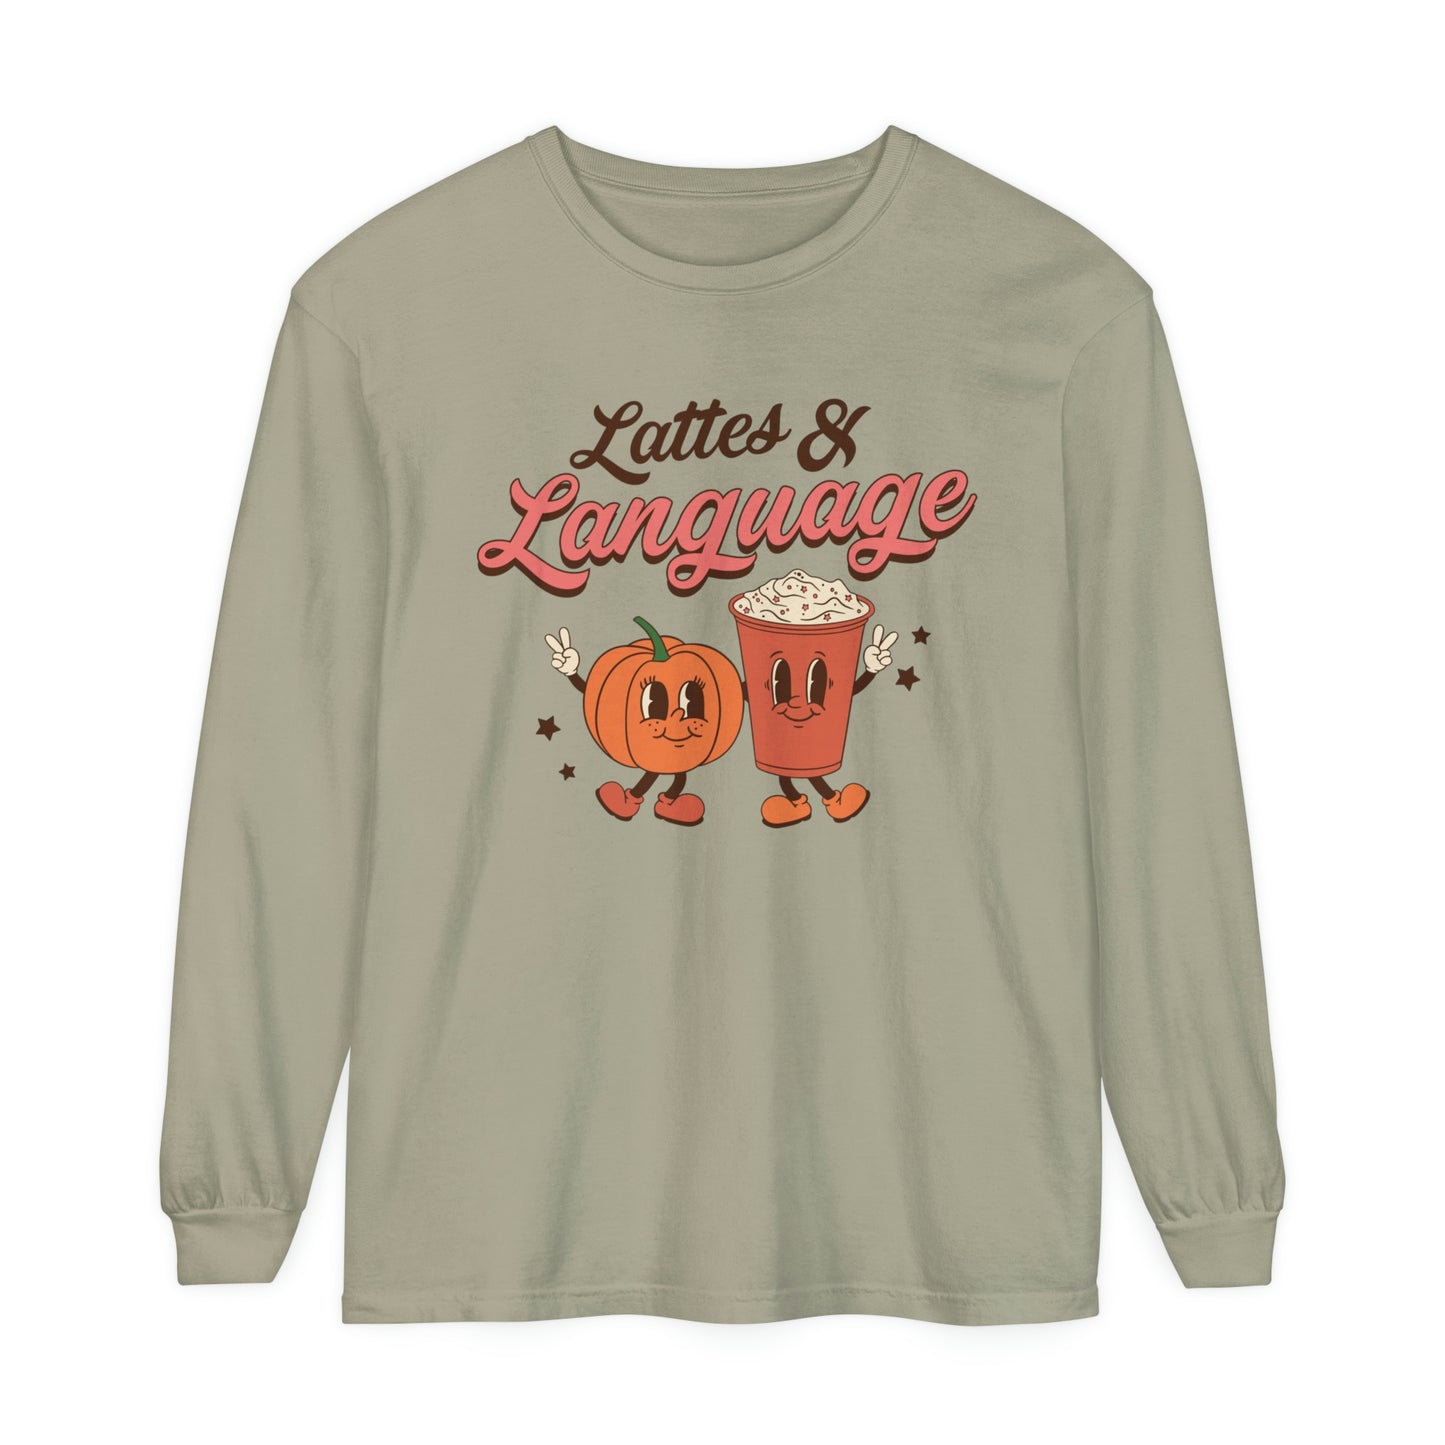 Lattes and Language Long Sleeve Comfort Colors T-Shirt